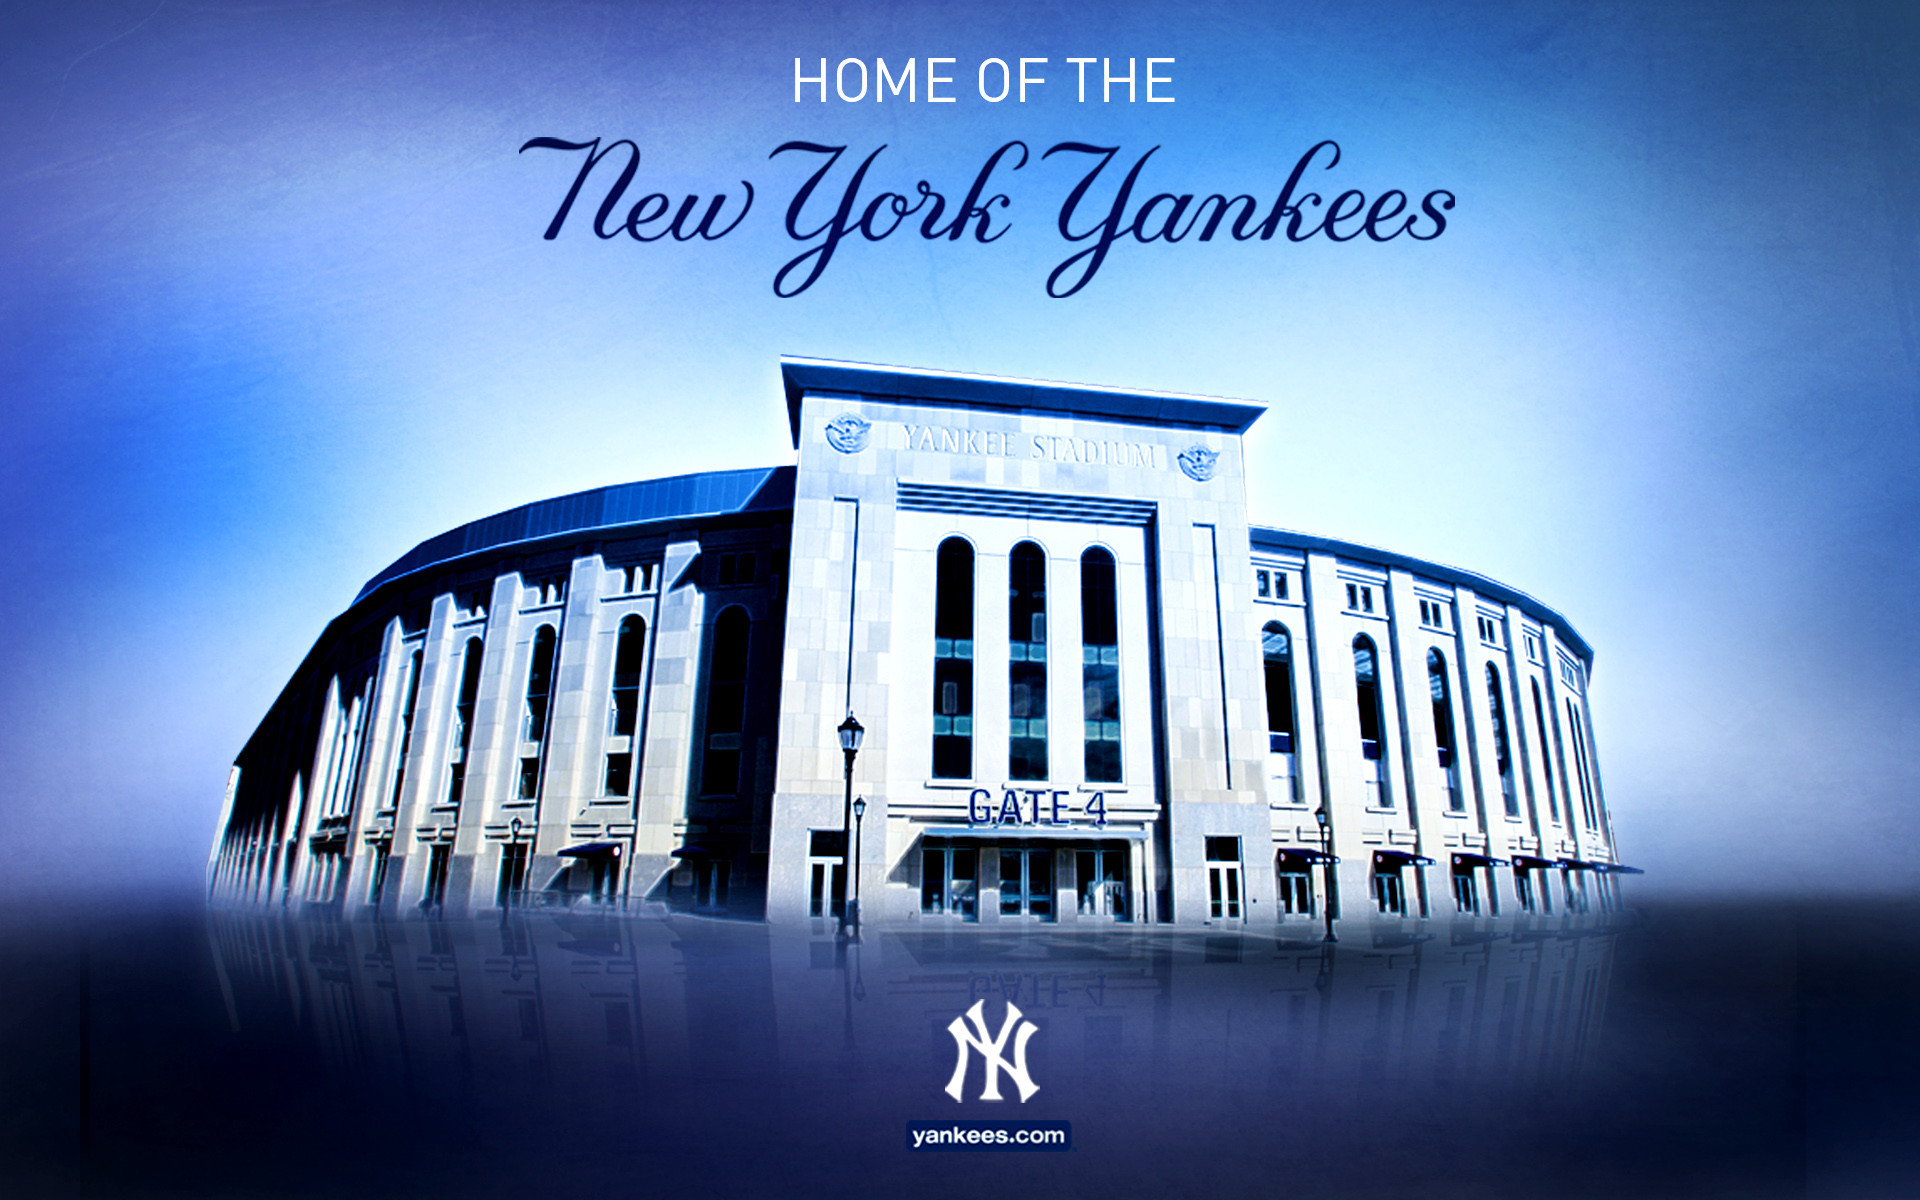 Ny Yankees Hd Wallpaper Iphone Plus Hd Wallpapers For Iphone  แฟนไทย